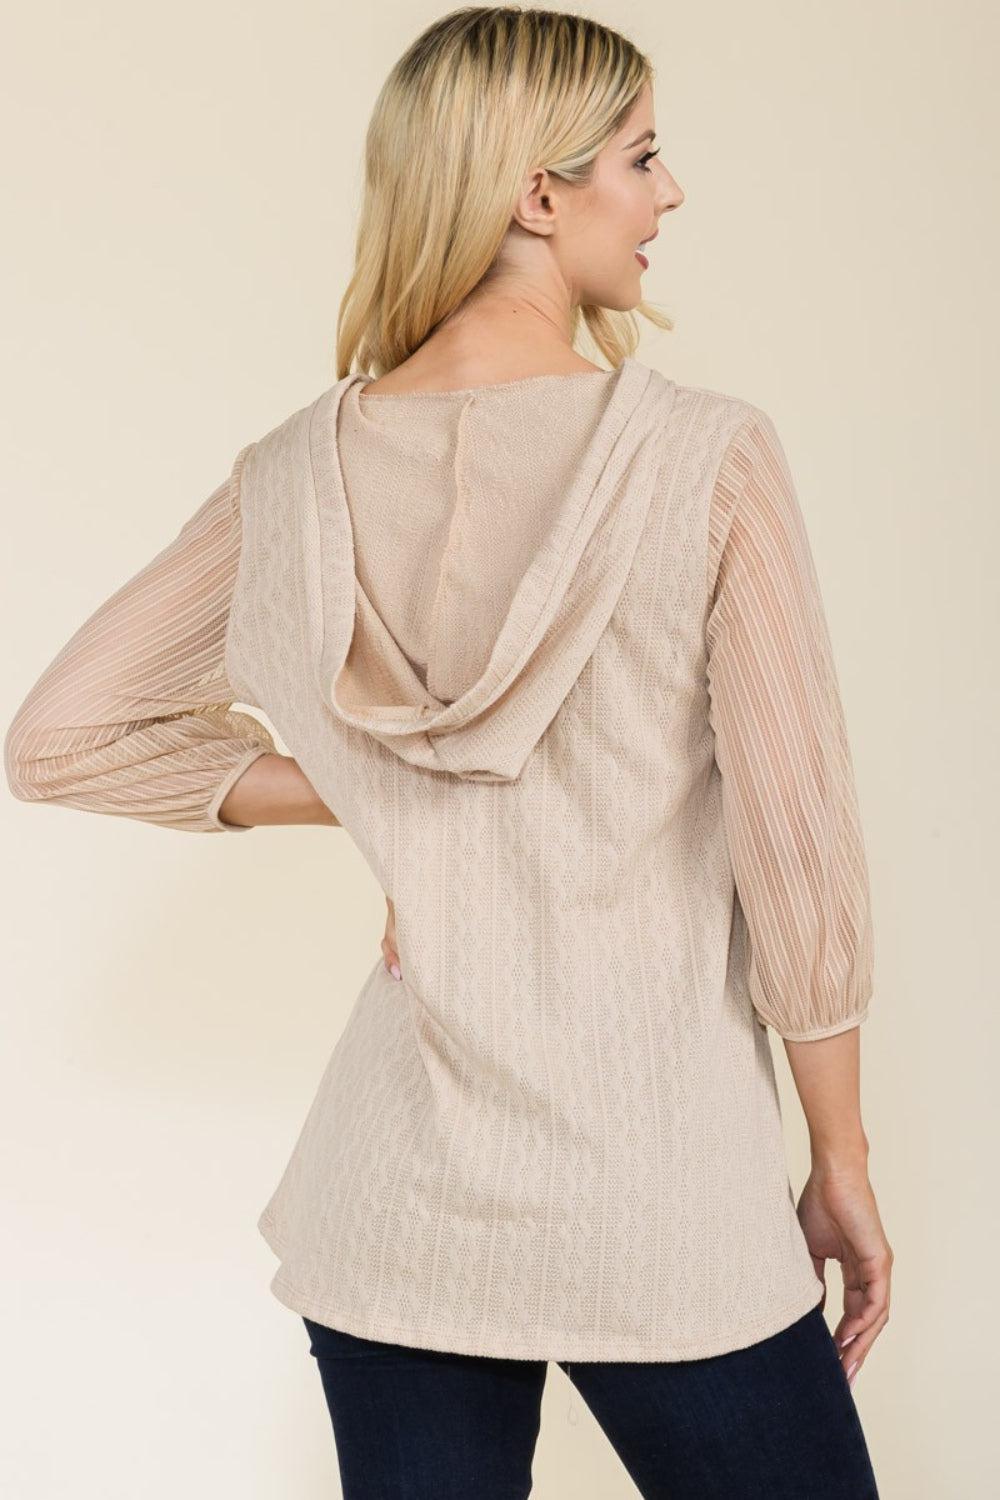 a woman wearing a beige top with a back tie